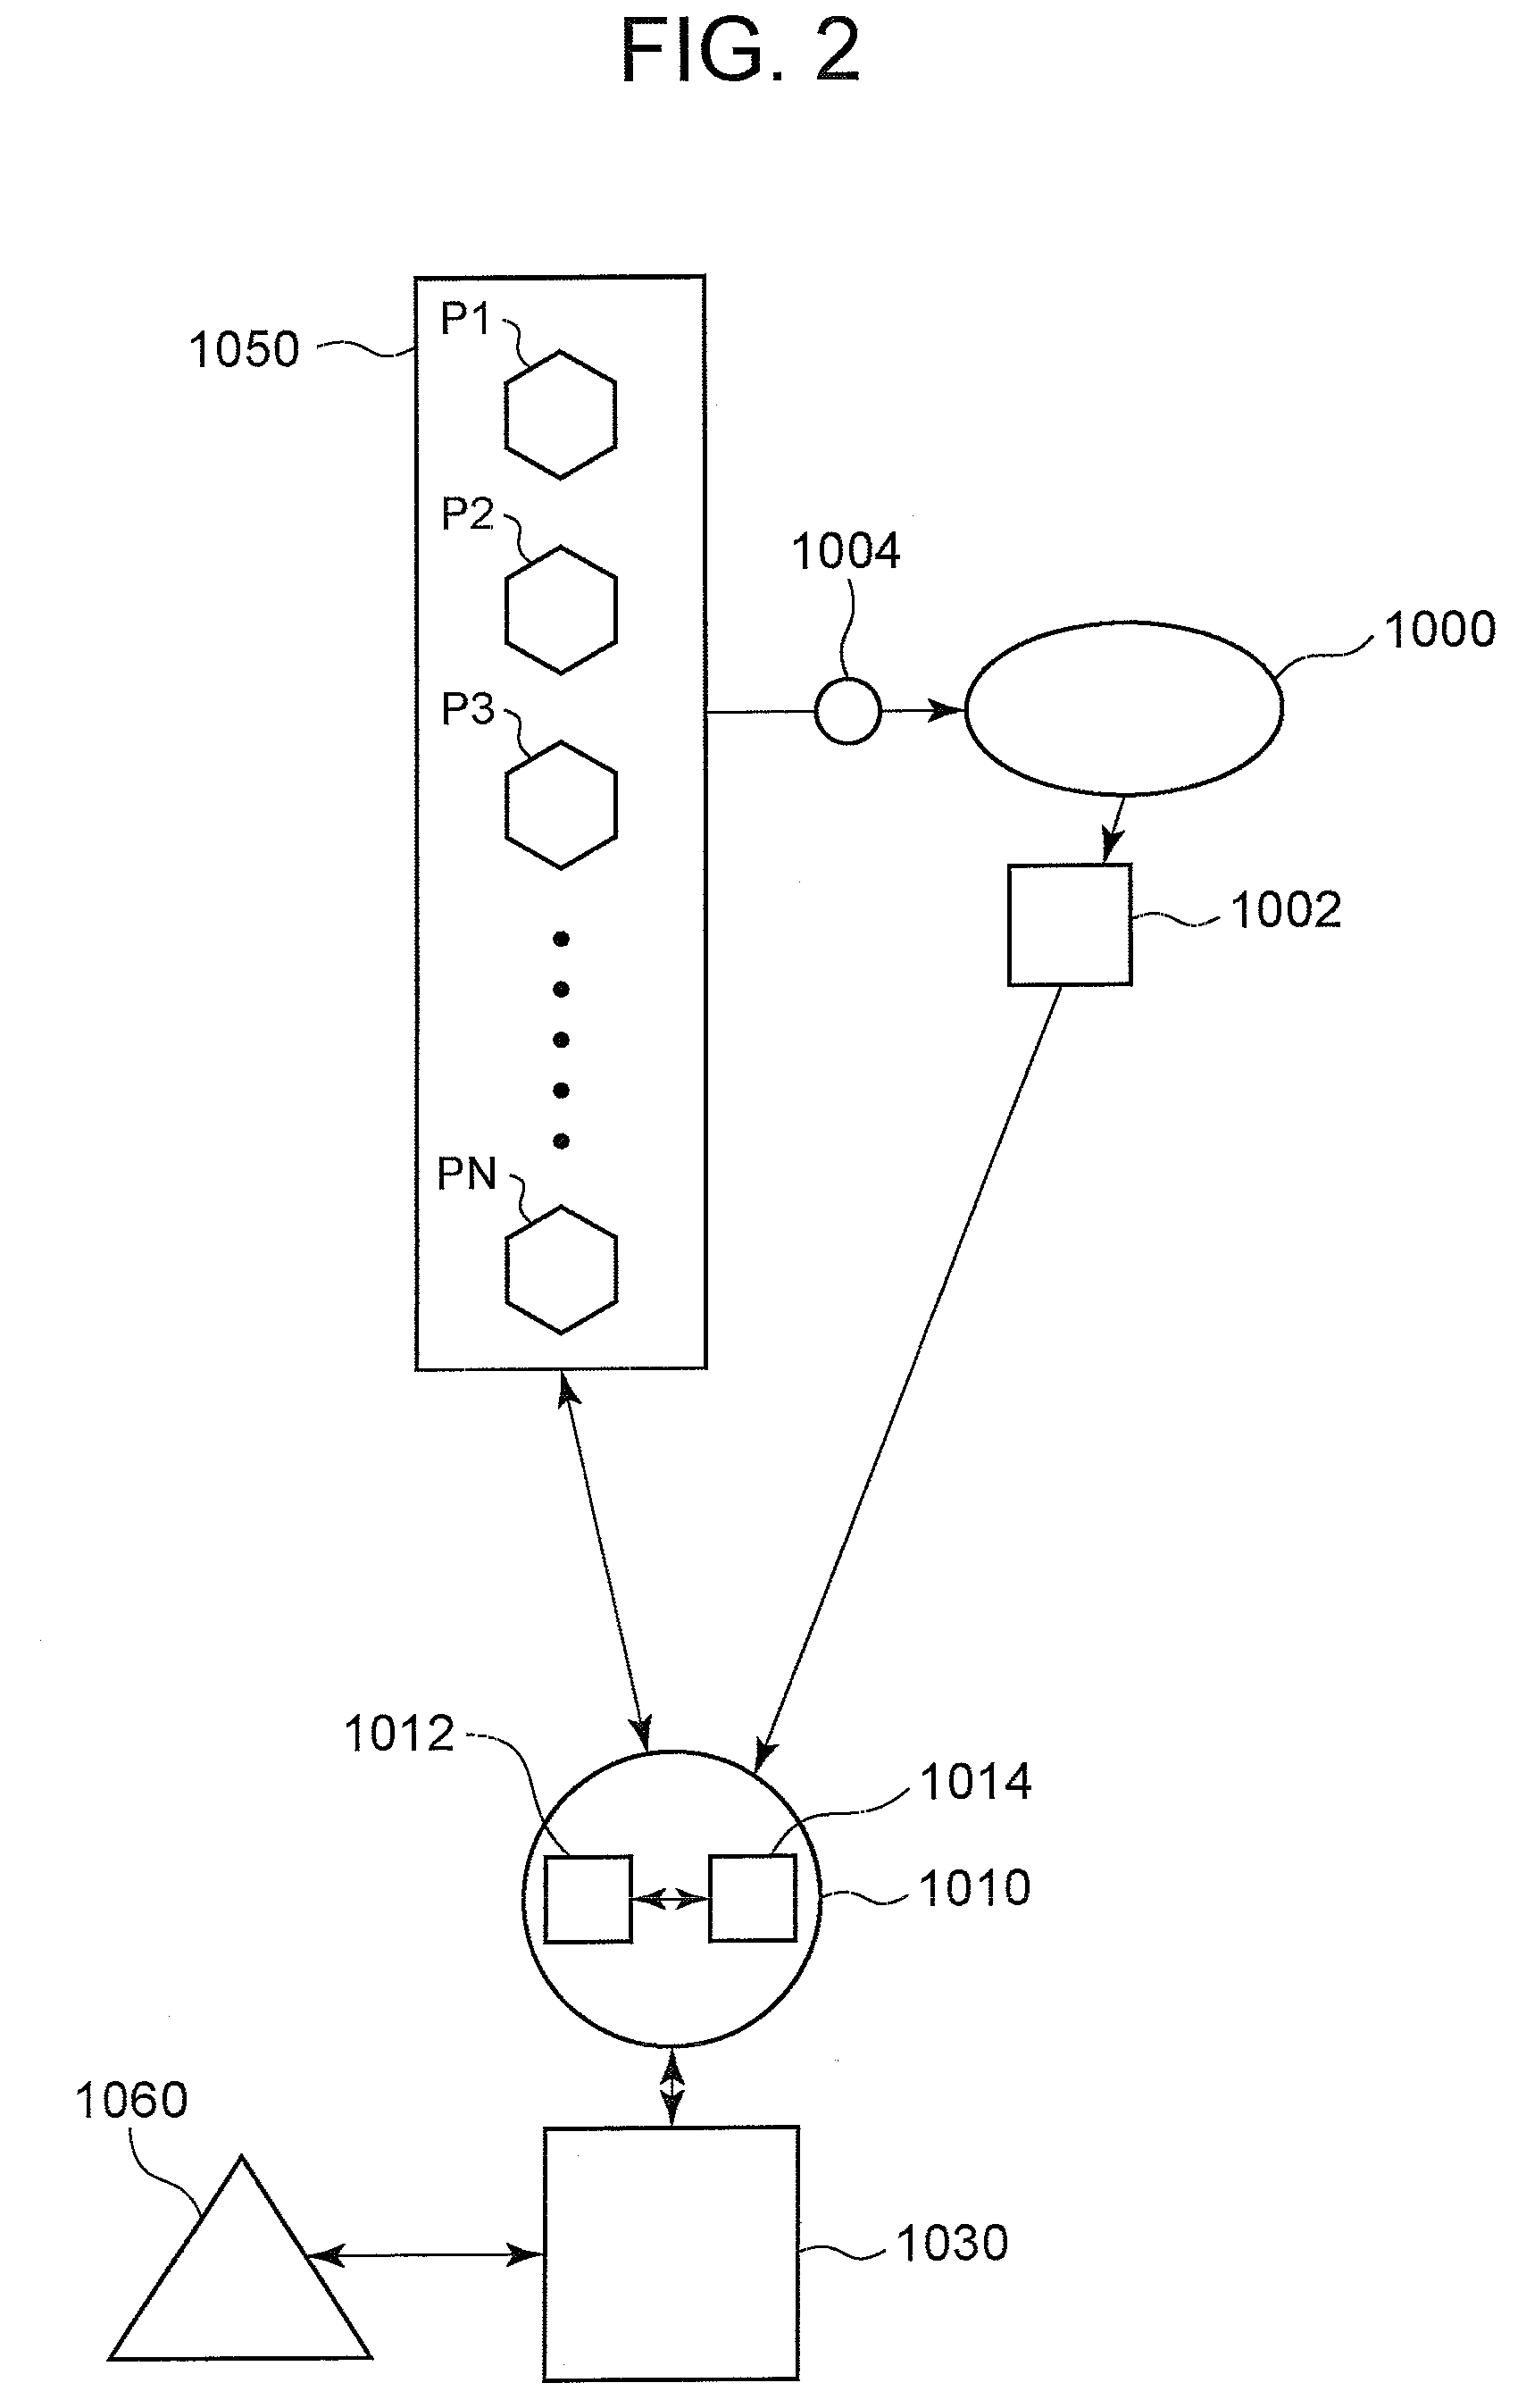 Method and device to administer anesthetic and or vosactive agents according to non-invasively monitored cardiac and or neurological parameters